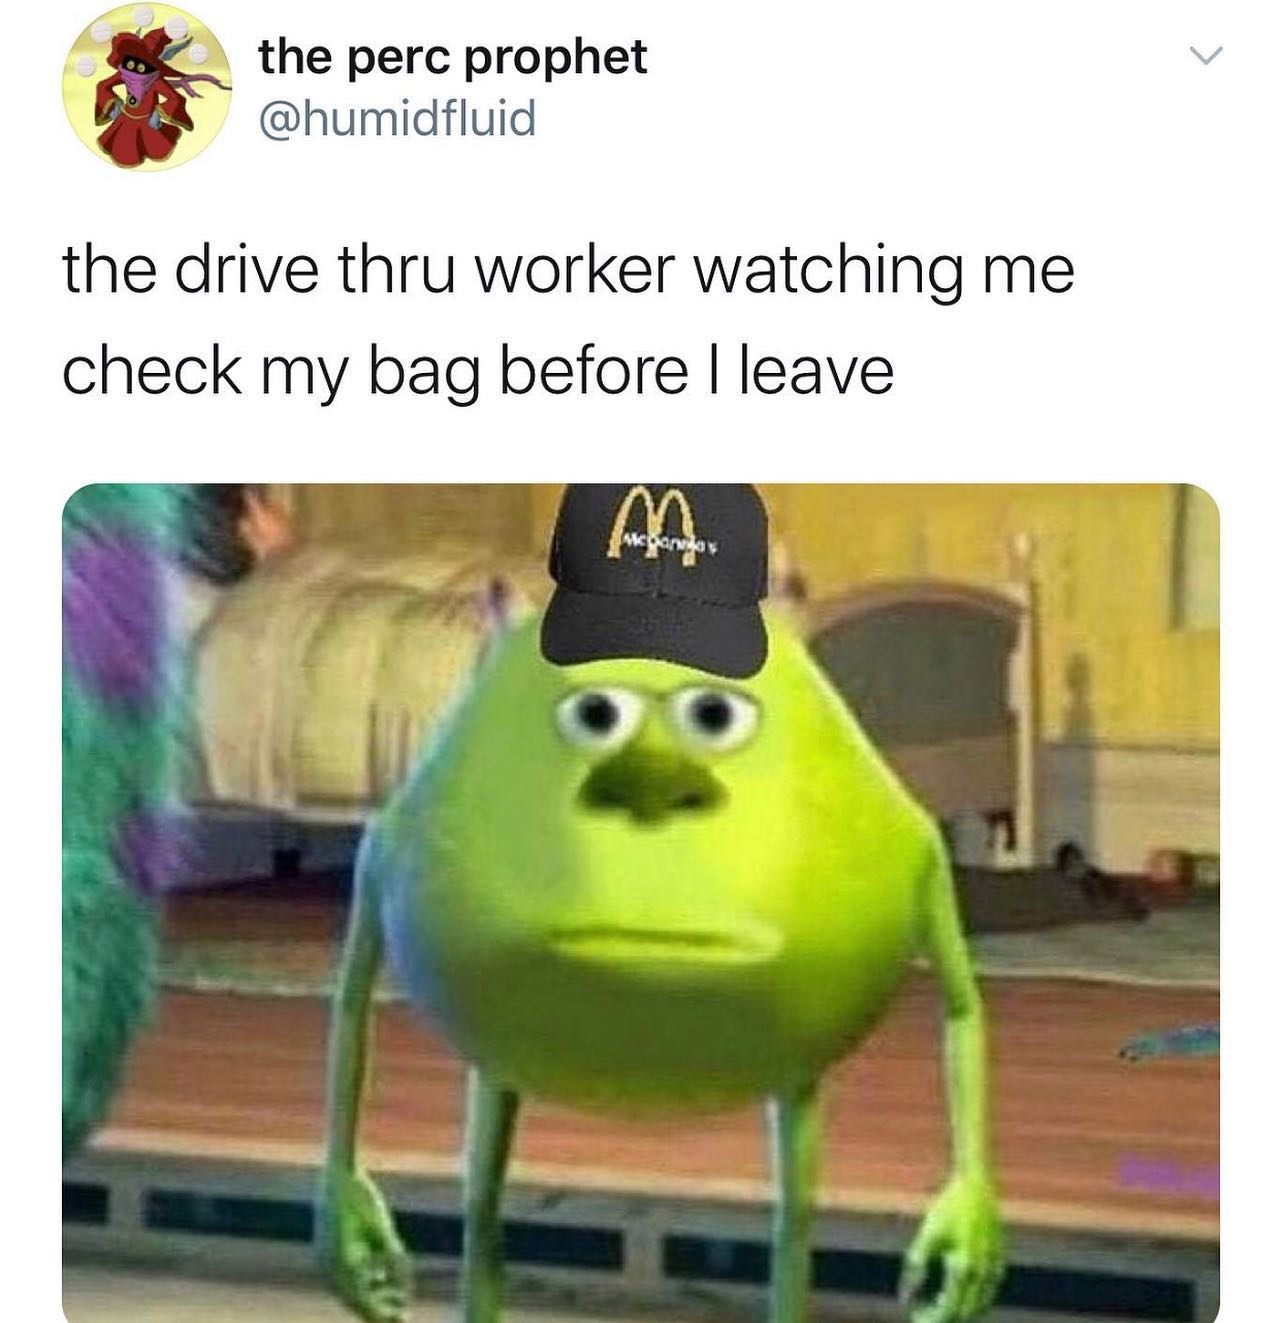 dank memes - mike and sully face swap meme - the perc prophet me the drive thru worker watching check my bag before I leave m.